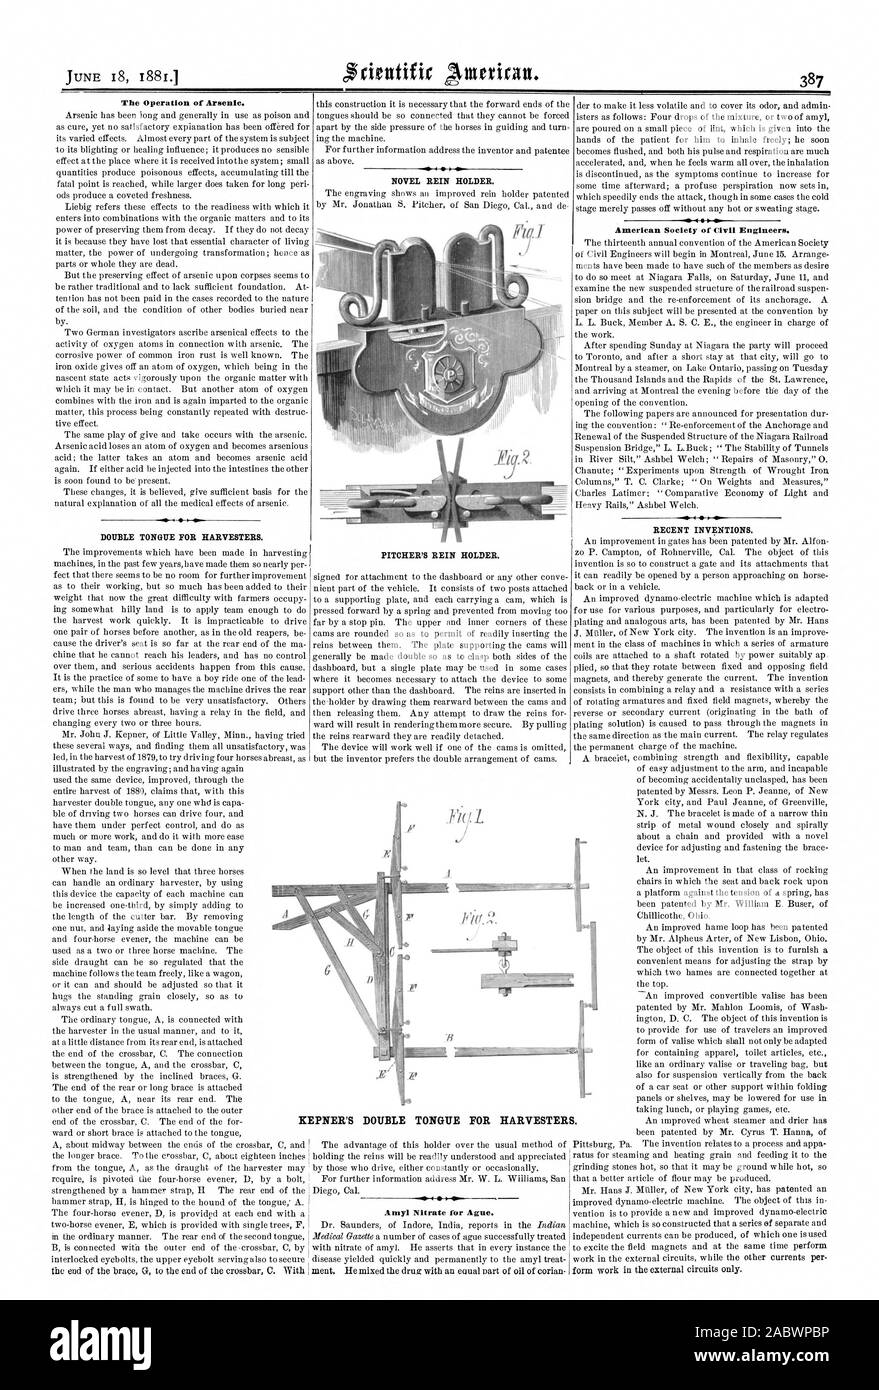 The Operation of Arsenic. DOUBLE TONGUE FOR HARVESTERS. NOVEL REIN HOLDER. PITCHER'S REIN HOLDER. Amyl Nitrate for Ague. American Society of Civil Engineers. RECENT INVENTIONS. FOR HARVESTERS. KEPNER'S DOUBLE TONGUE, scientific american, 1881-06-18 Stock Photo